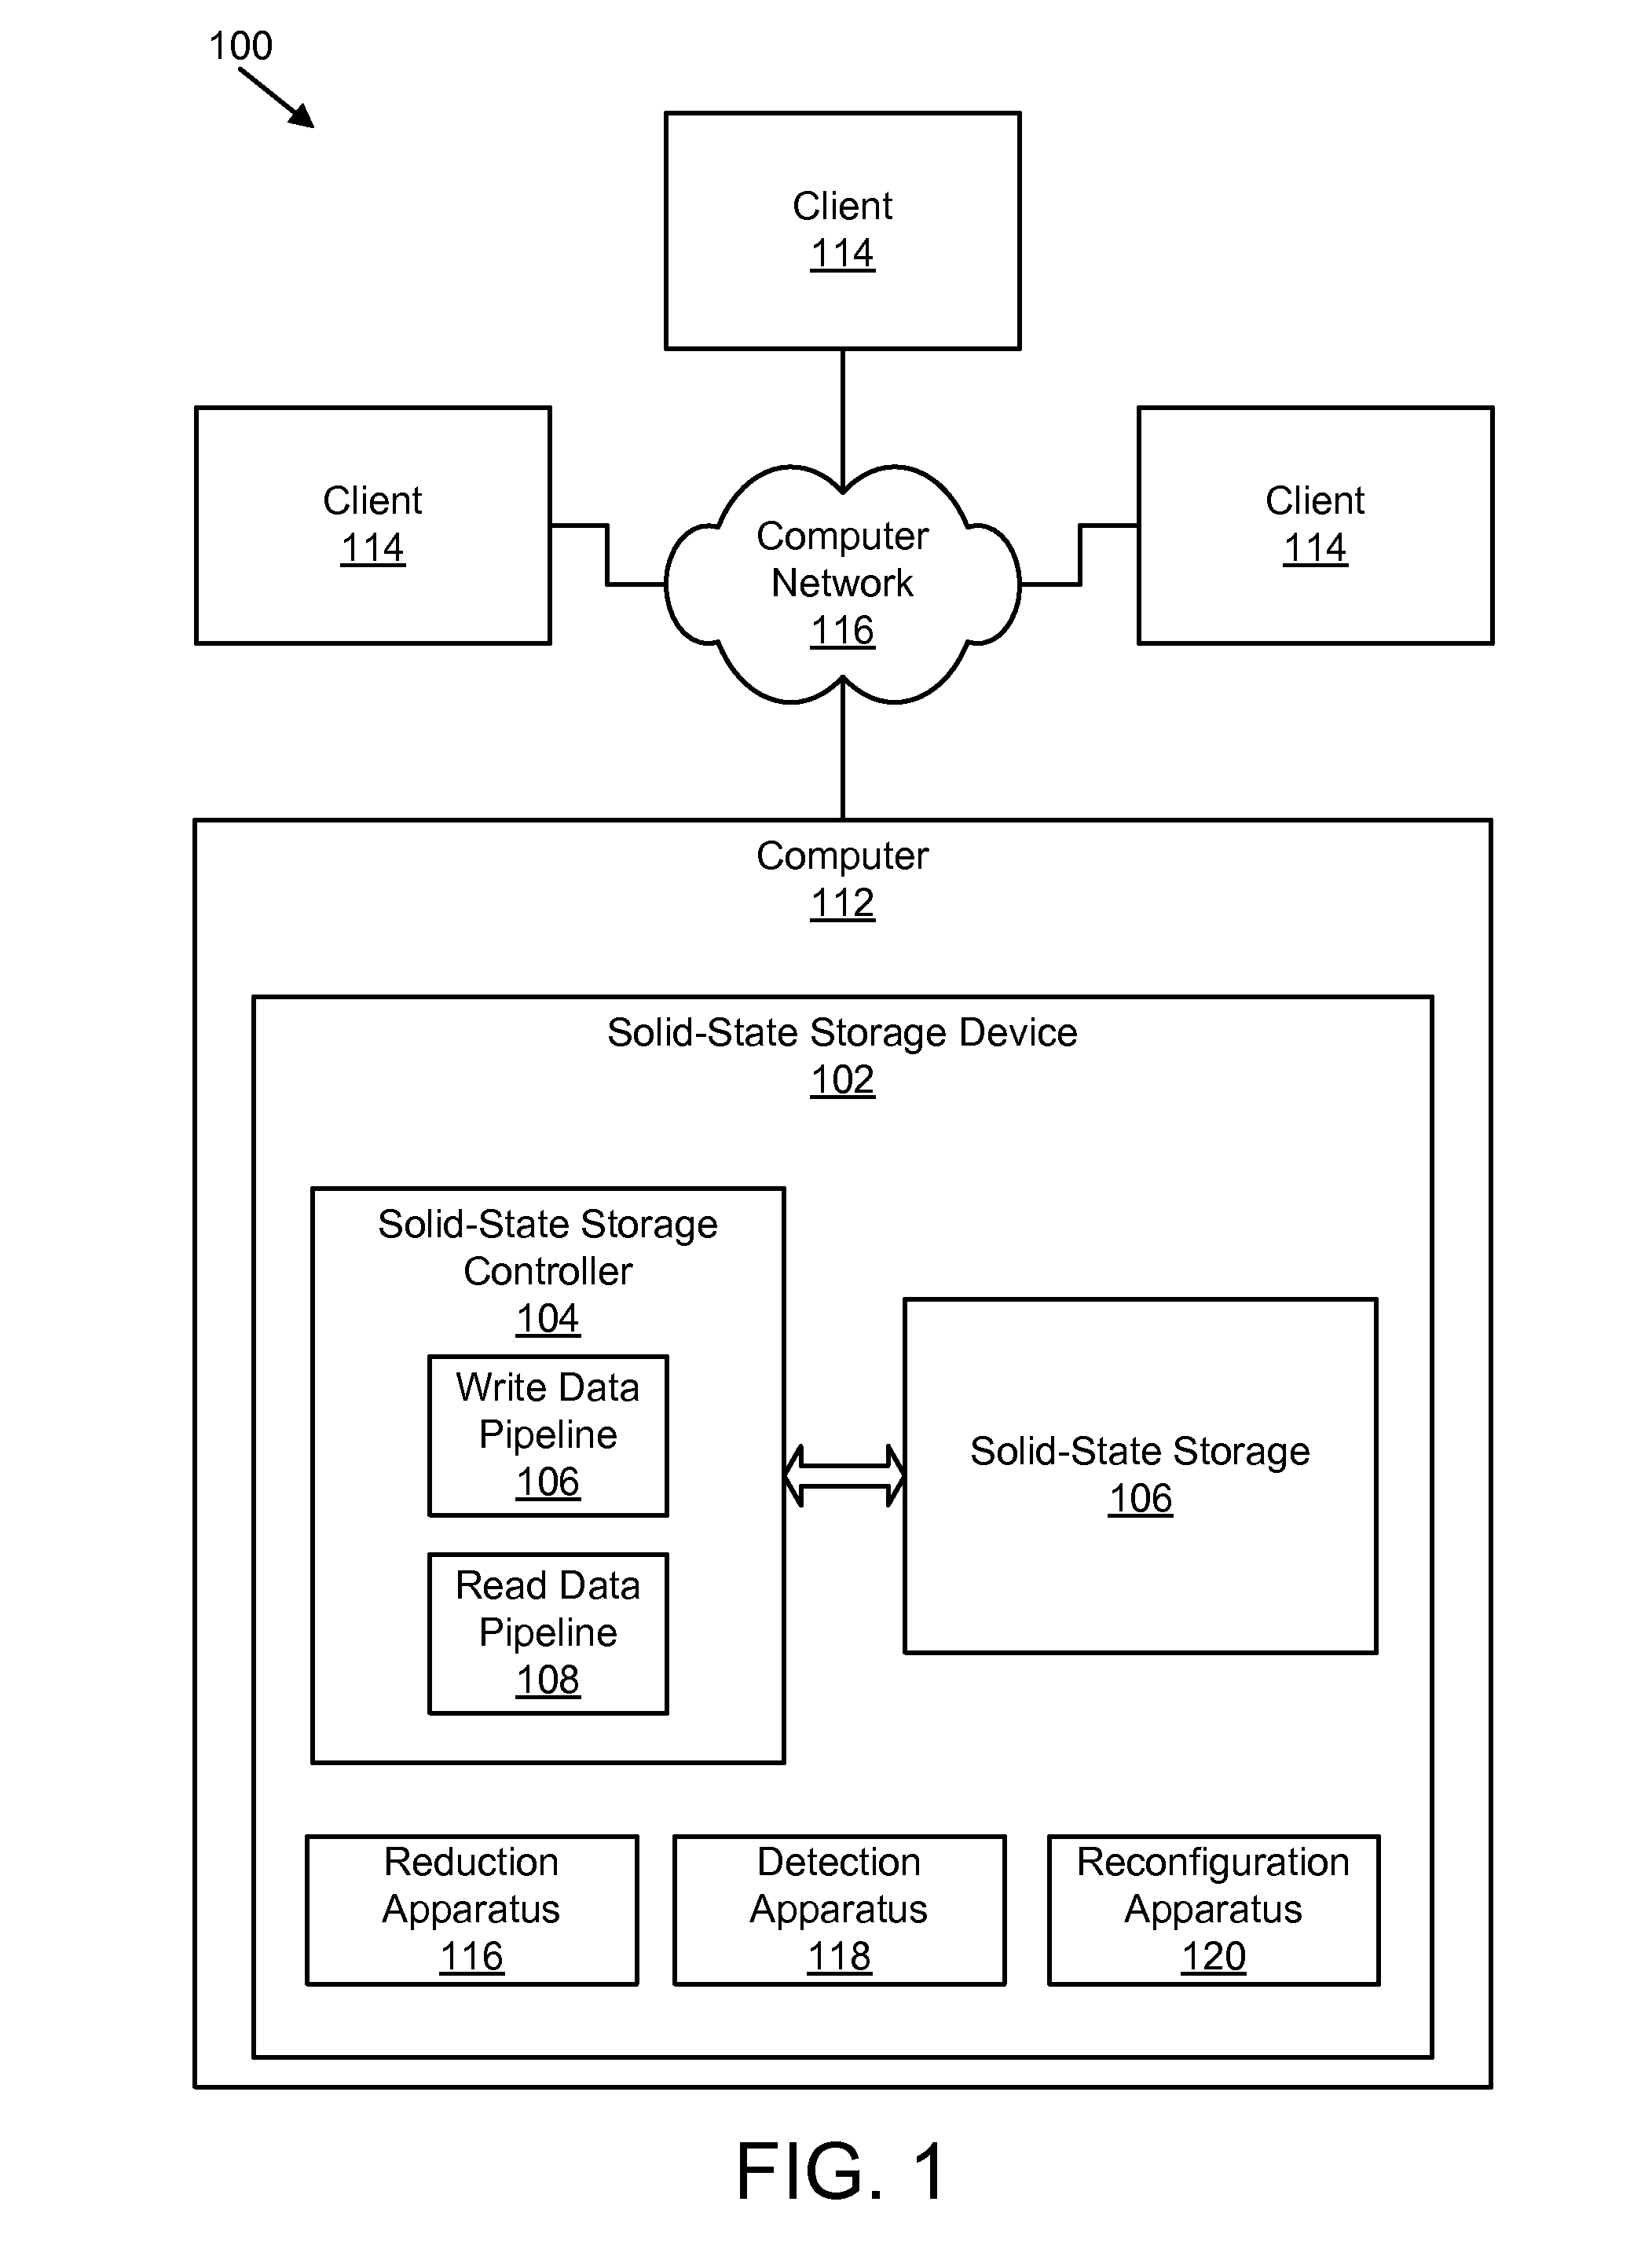 Apparatus, system, and method for detecting and replacing failed data storage